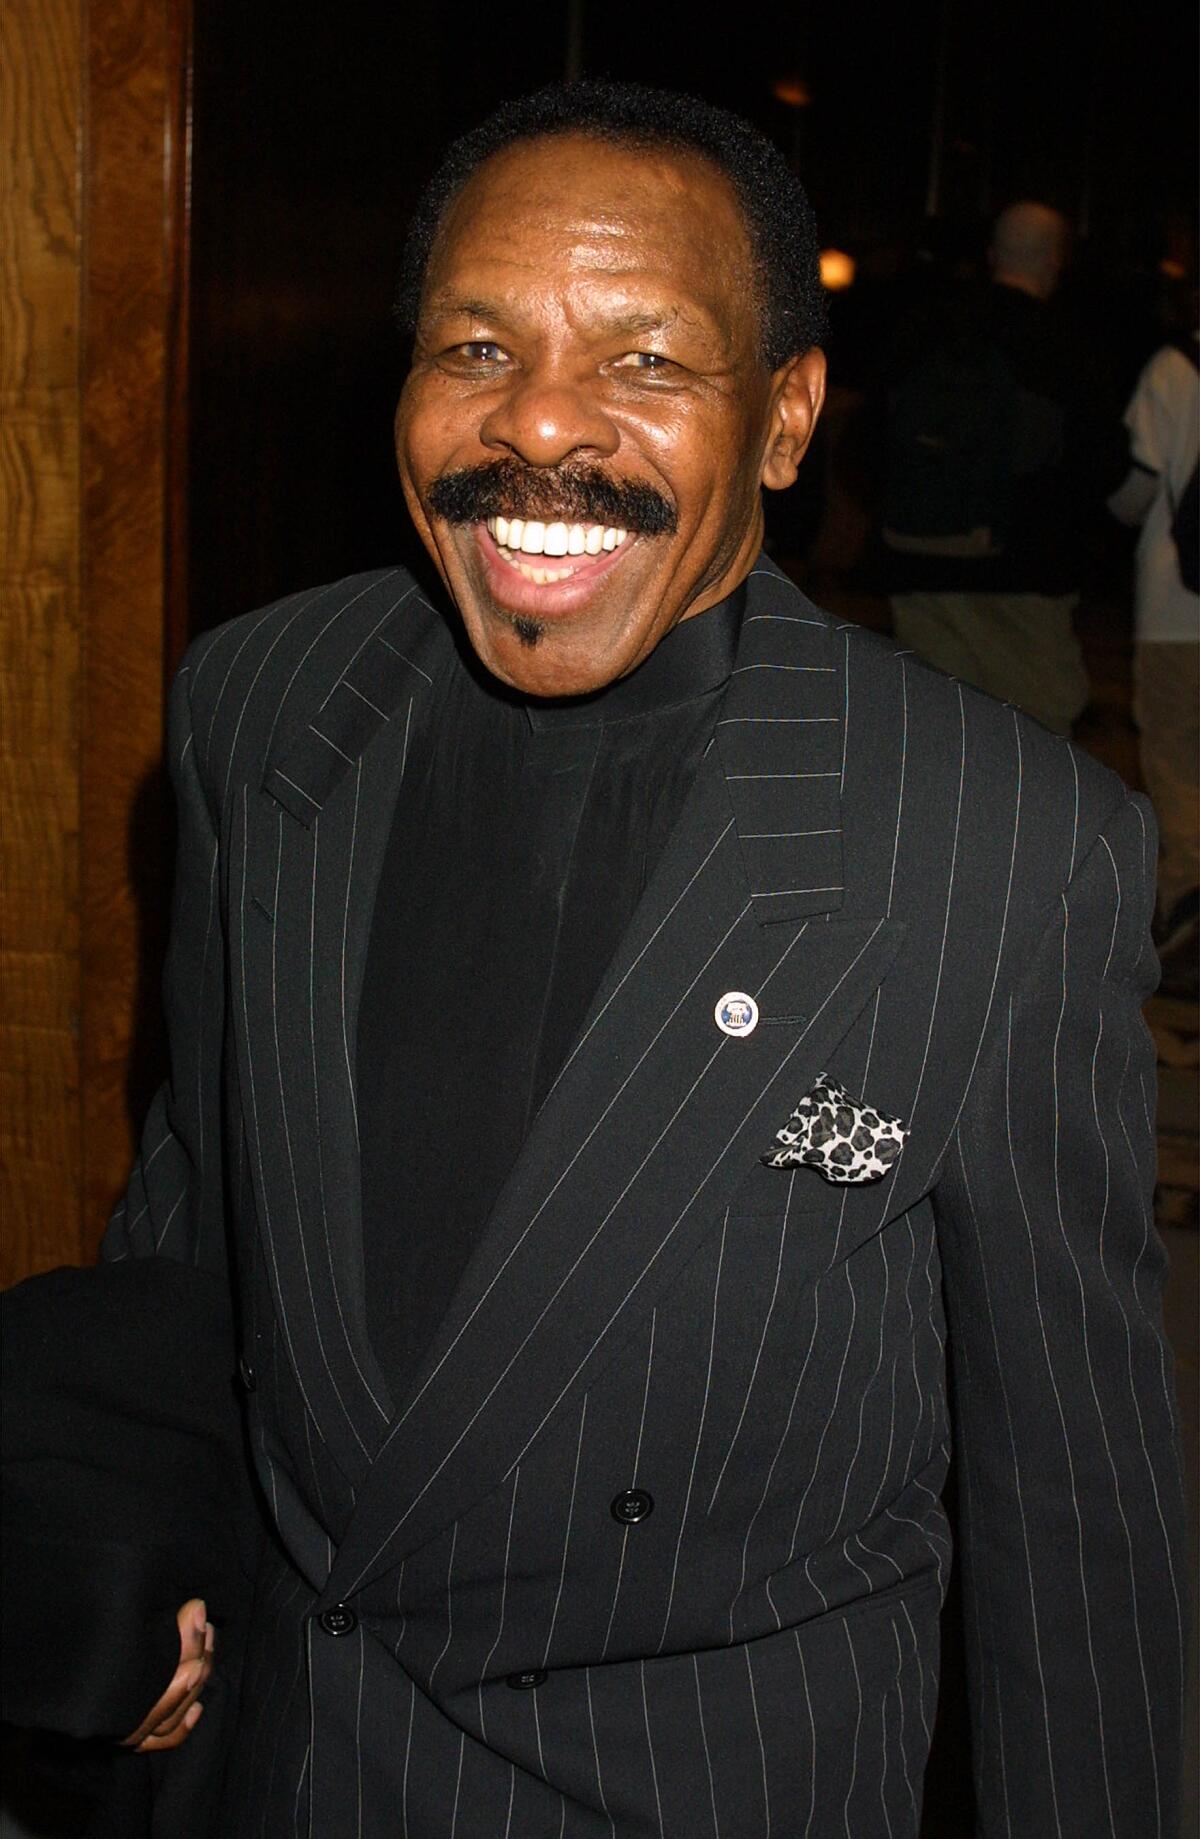 Singer Lloyd Price smiles while wearing a pinstripe jacket with a pin on his lapel.